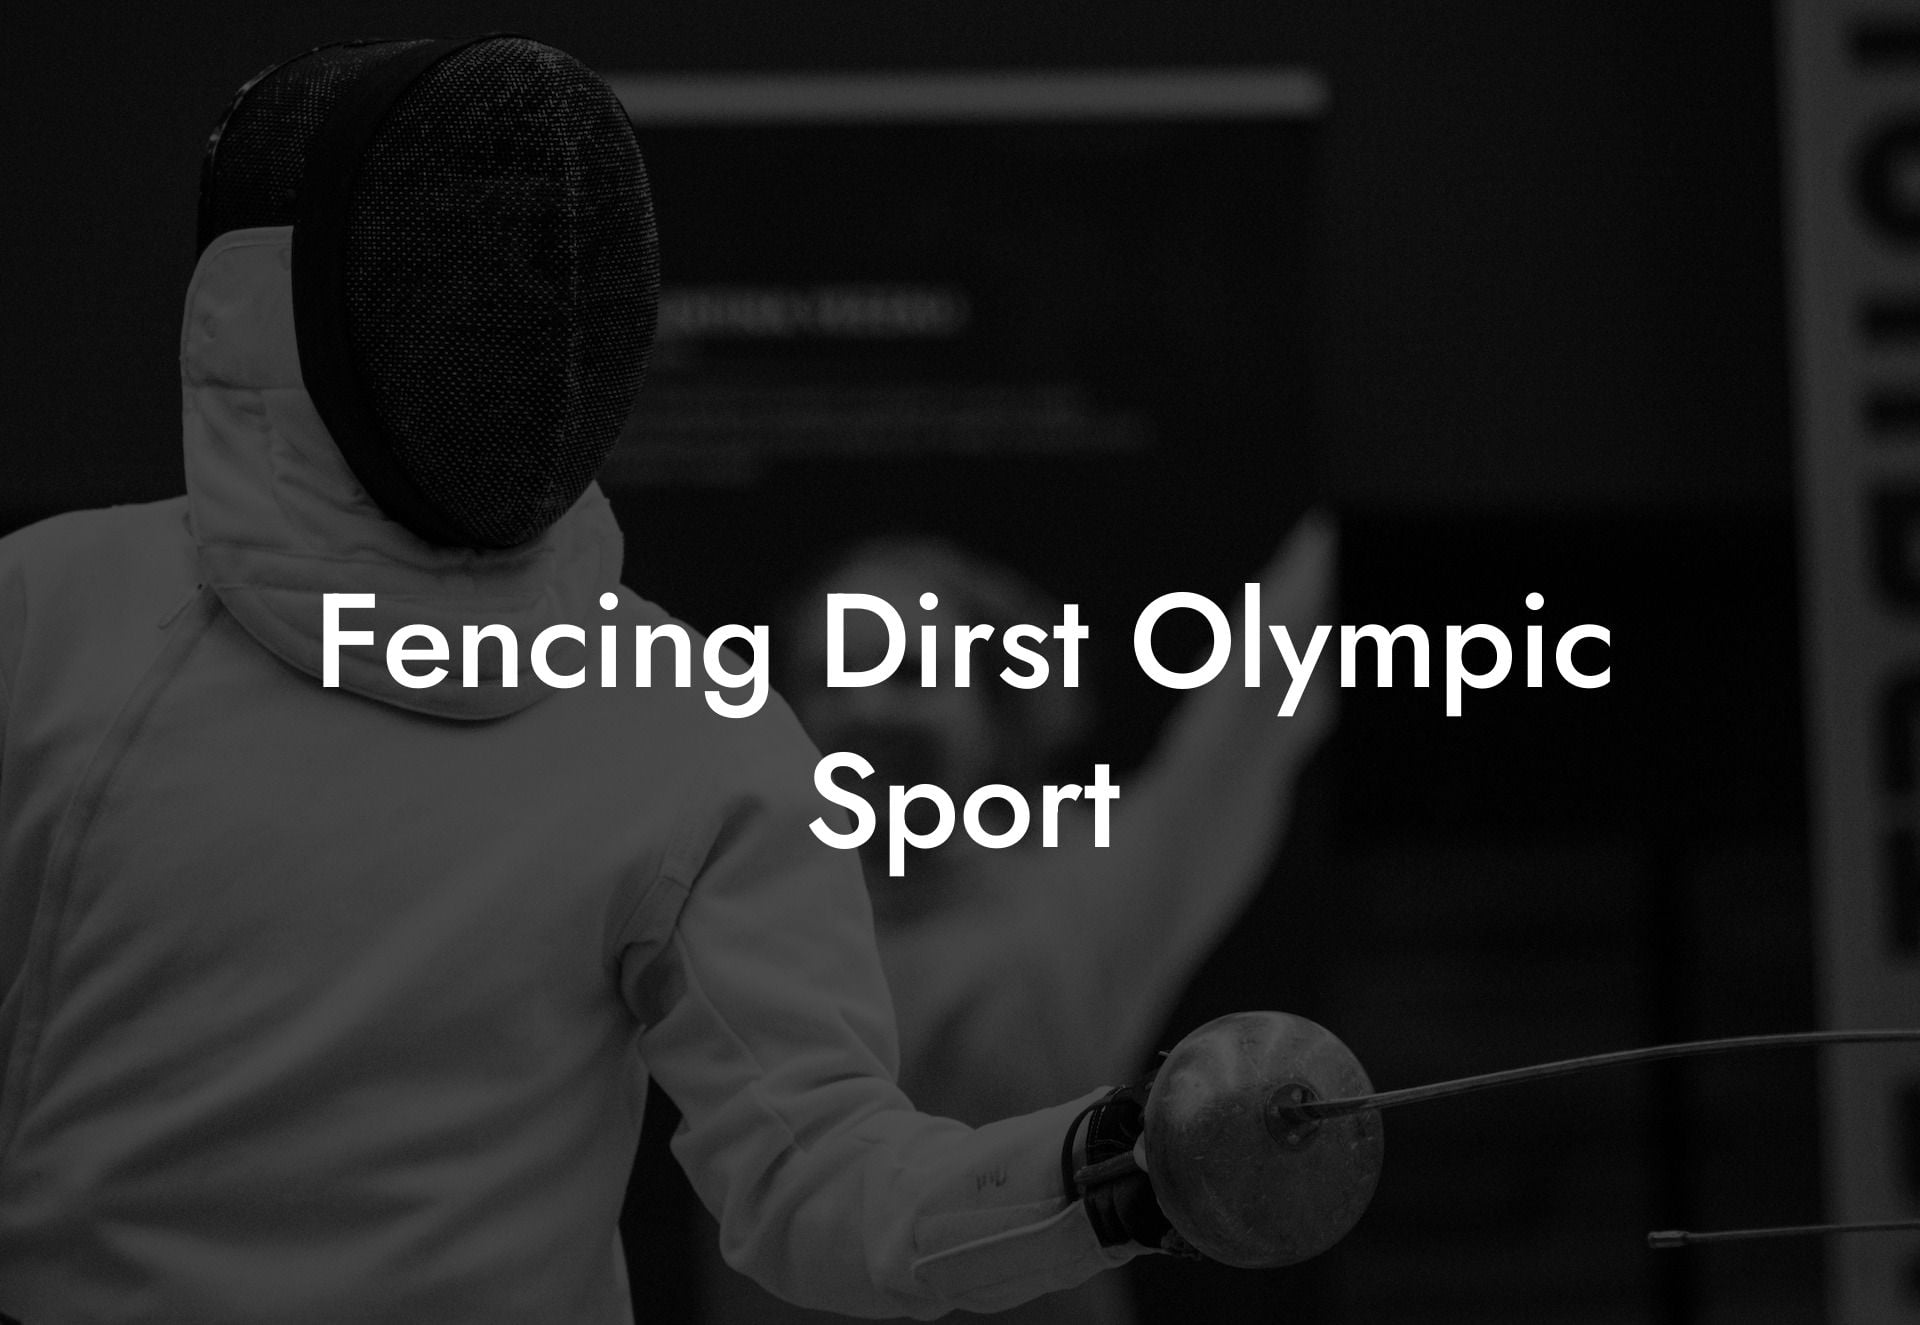 Fencing Dirst Olympic Sport